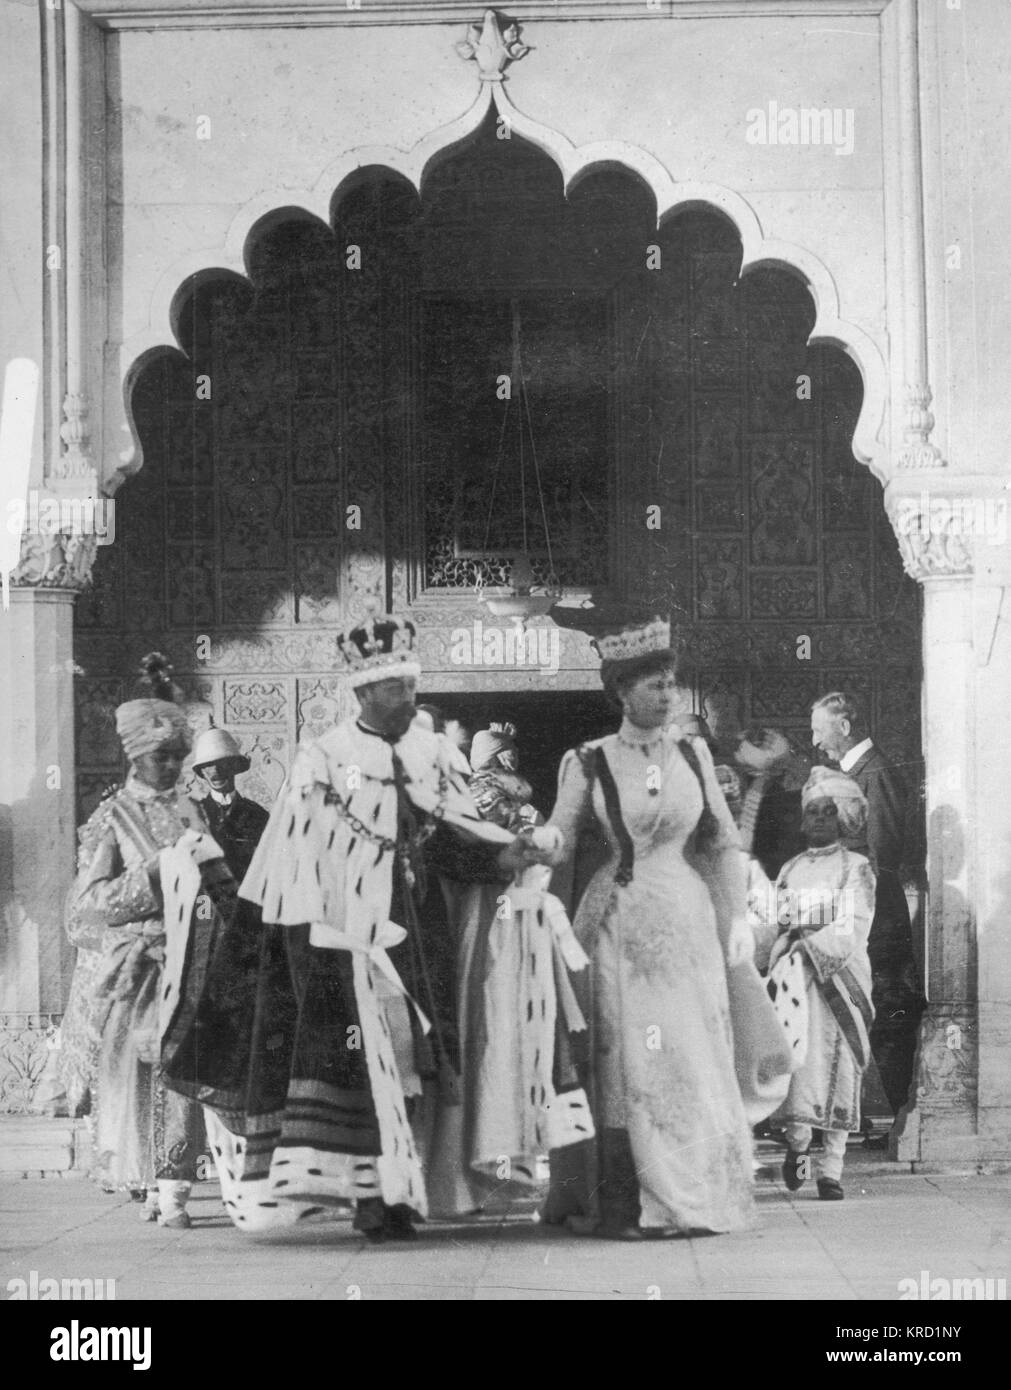 King George V and Queen Mary emerging in their robes and crowns to show themselves to their Indian subjects after the Coronation Durbar ceremony in Delhi, India.    12 December 1911 Stock Photo